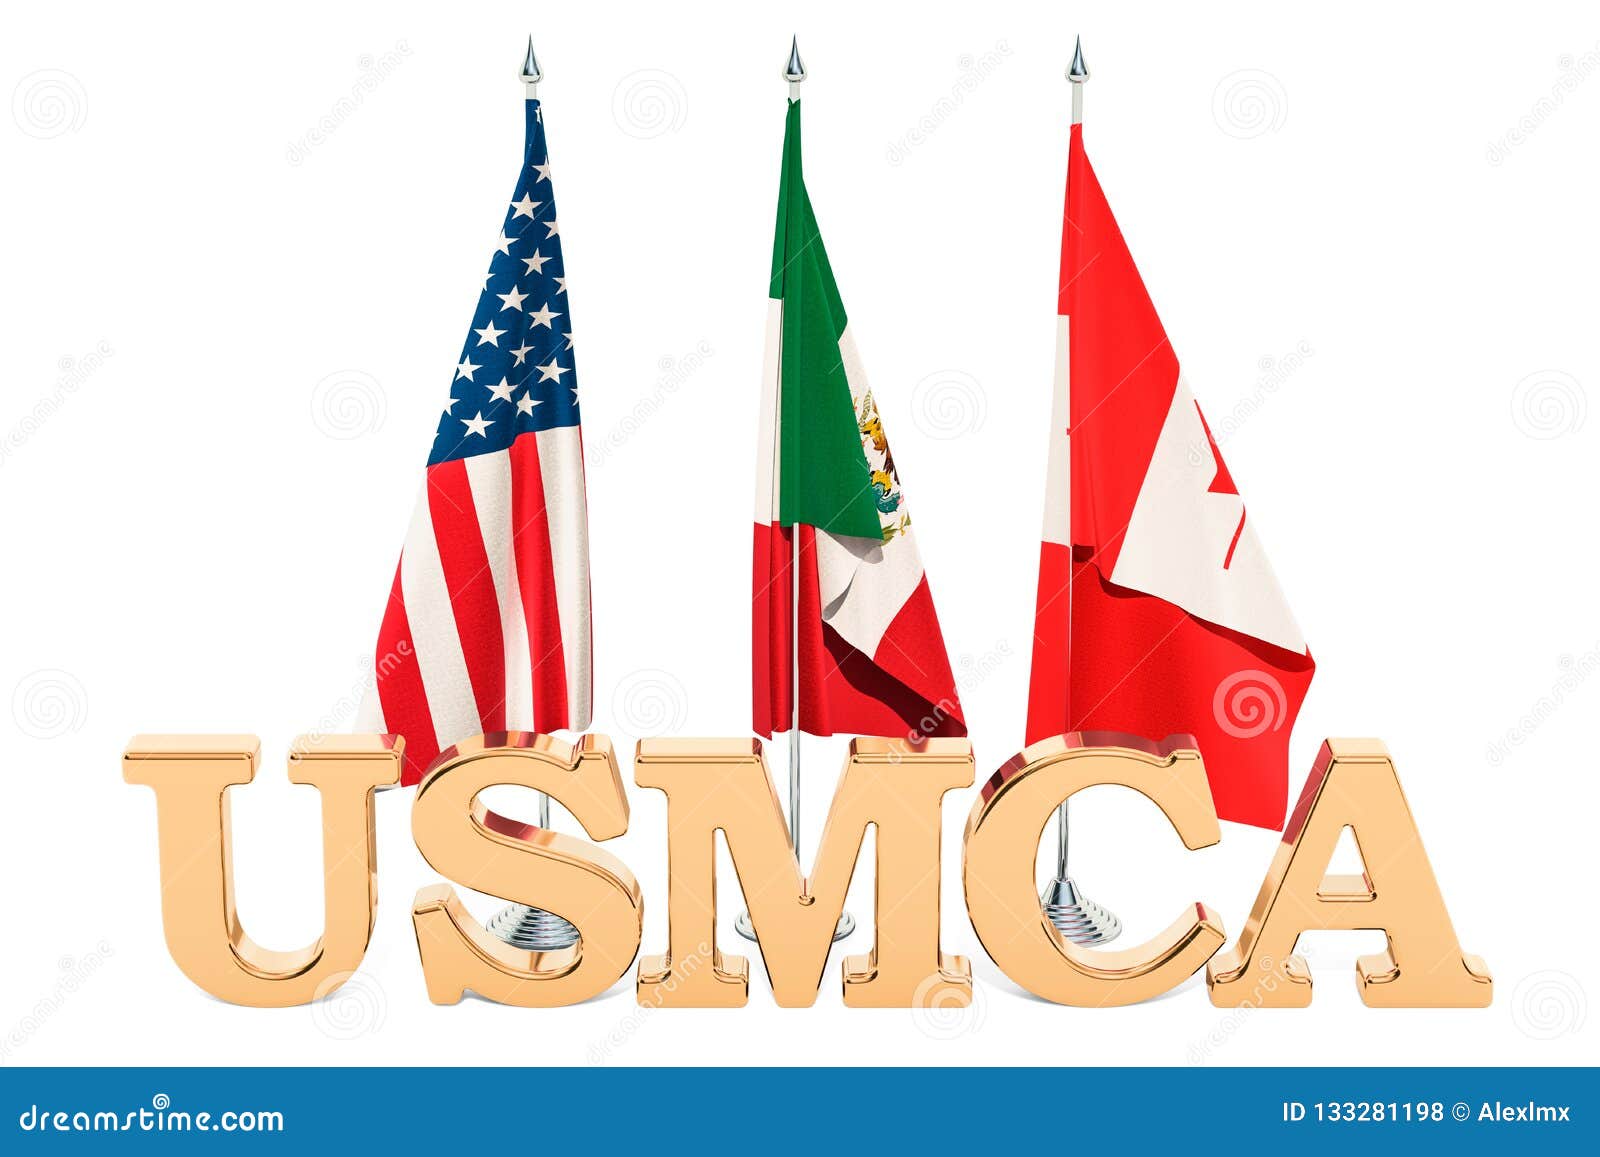 flags of the united states, mexico and canada, usmca agreement c